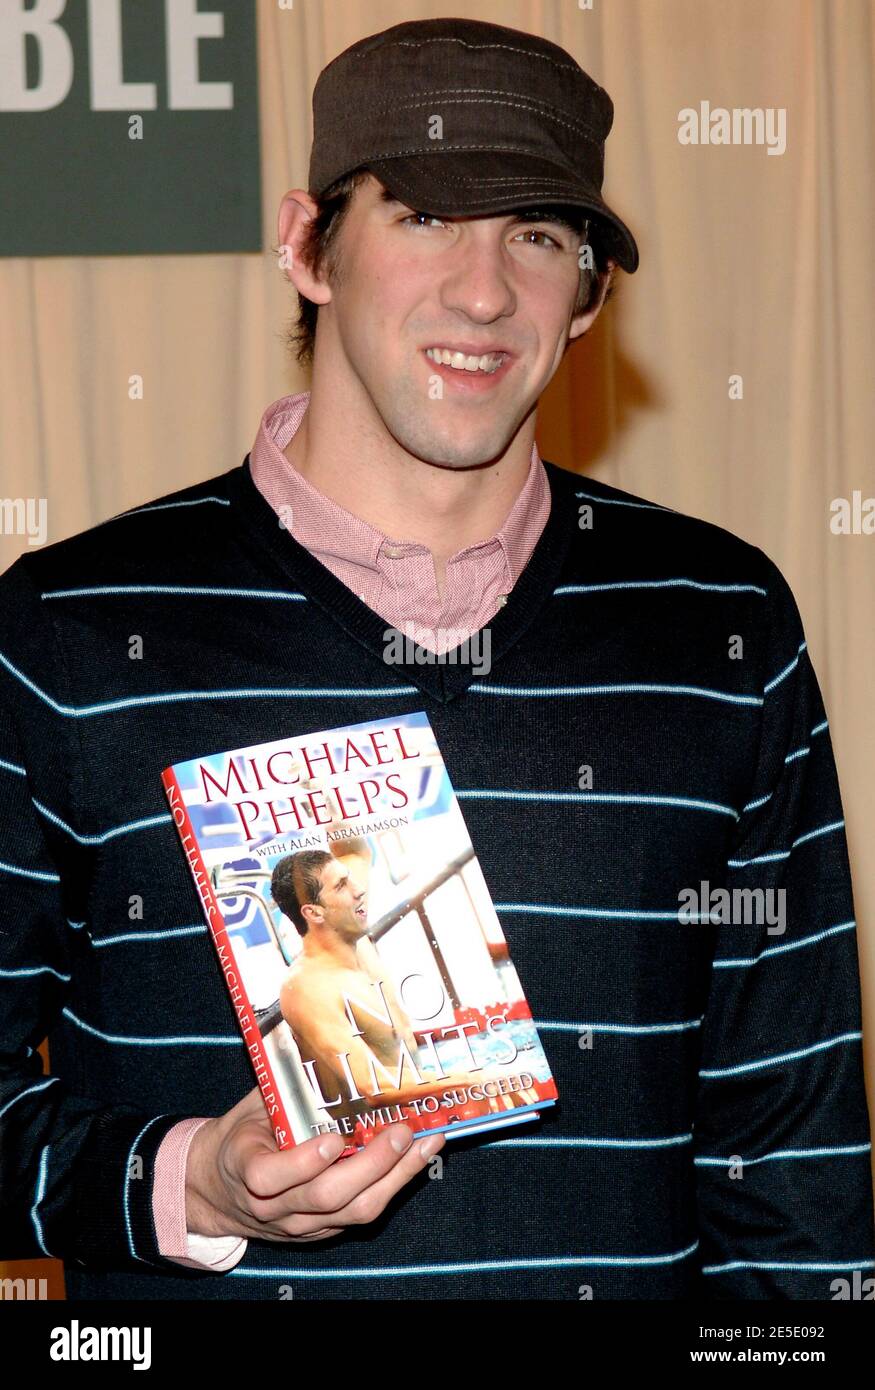 Olympian Gold medalist Michael Phelps signs copies of his book No Limit : The Will To Succeed at Barnes and Noble bookstore in New York City, NY, USA on December 9, 2008. No Limits: The Will to Succeed provides insights from the Beijing Games, the pool, and the team, giving readers an up-close view of Michael Phelps's record-breaking performance. Phelps also shares anecdotes about his family, his coach, his passion for the sport, and lessons learned from unexpected challenges and obstacles. No Limits: The Will to Succeed is an inspirational memoir not only for fans of great, dramatic moments i Stock Photo